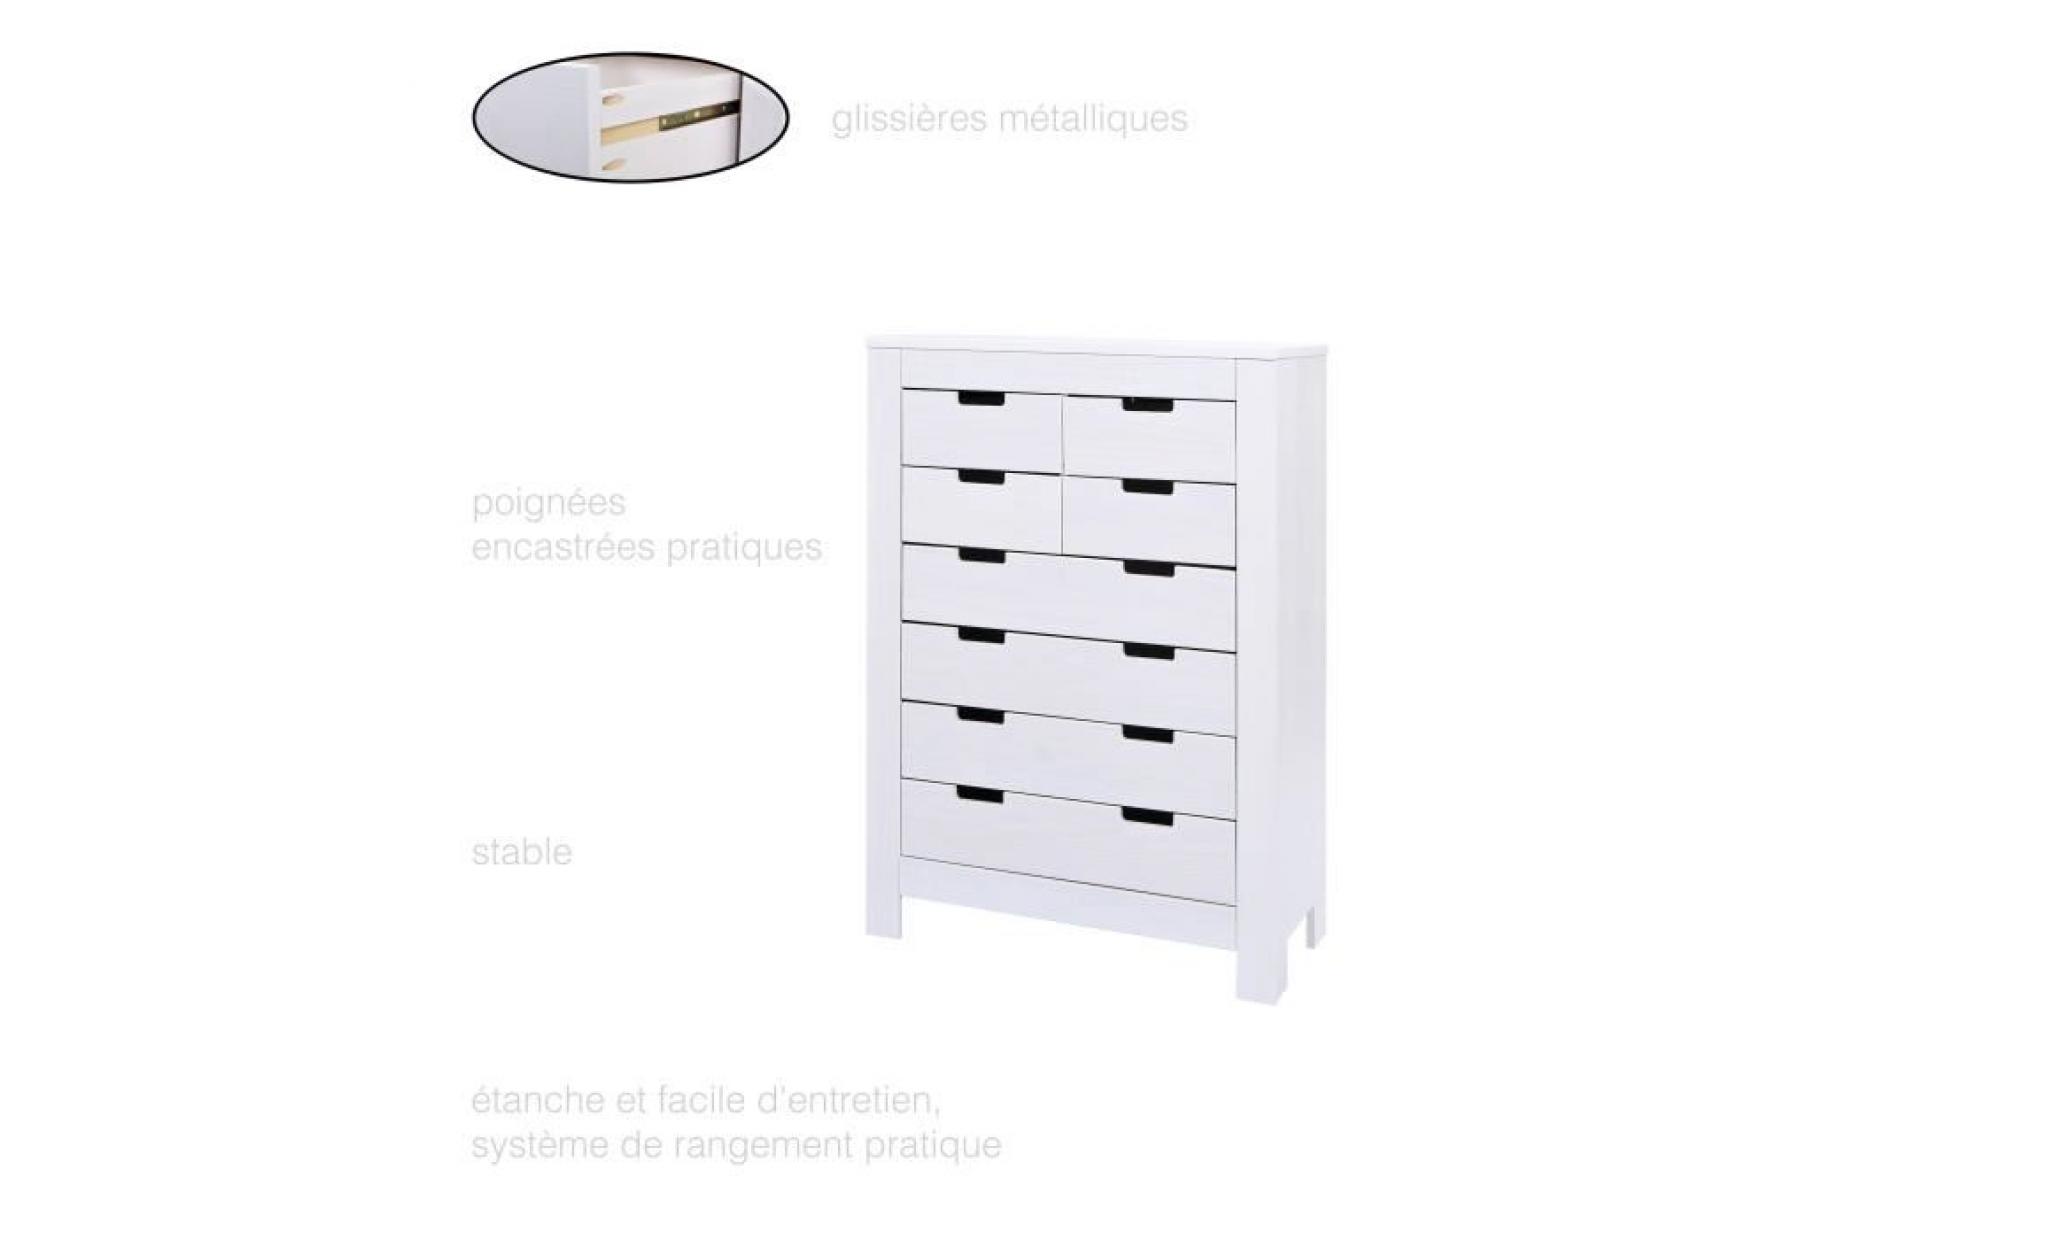 grande commode 8 tiroirs, commode en pin massif, commode chambre blanche, commode chiffonnier, armoire commode, meuble en pin